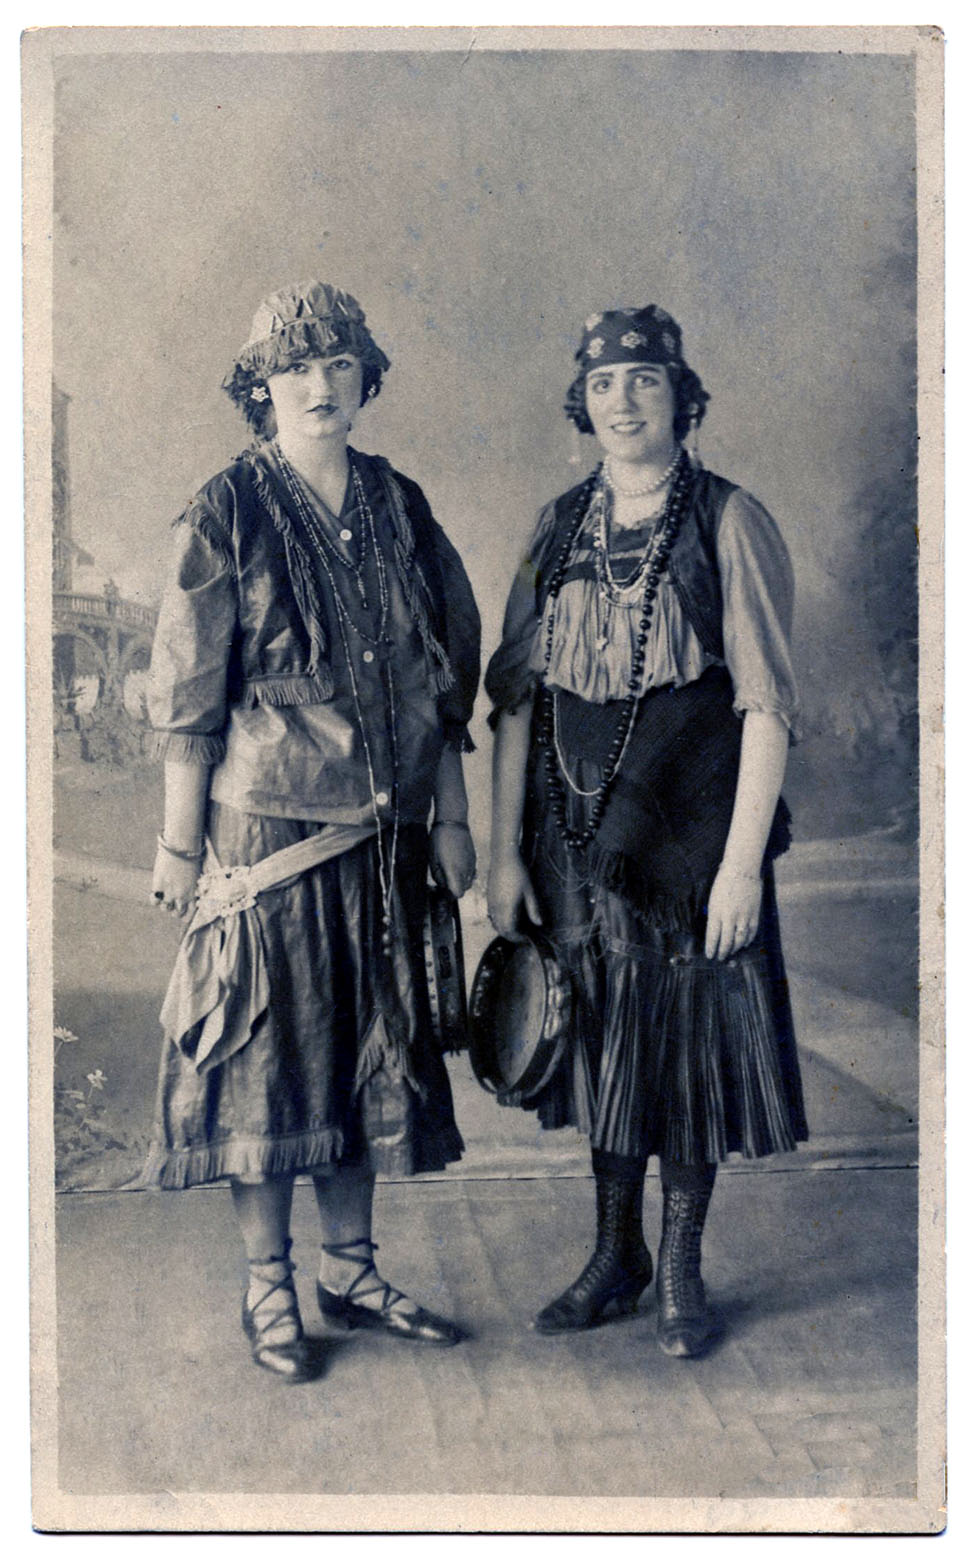 Old Fashioned Photo - 2 Ladies in Gypsy Costumes - The Graphics Fairy